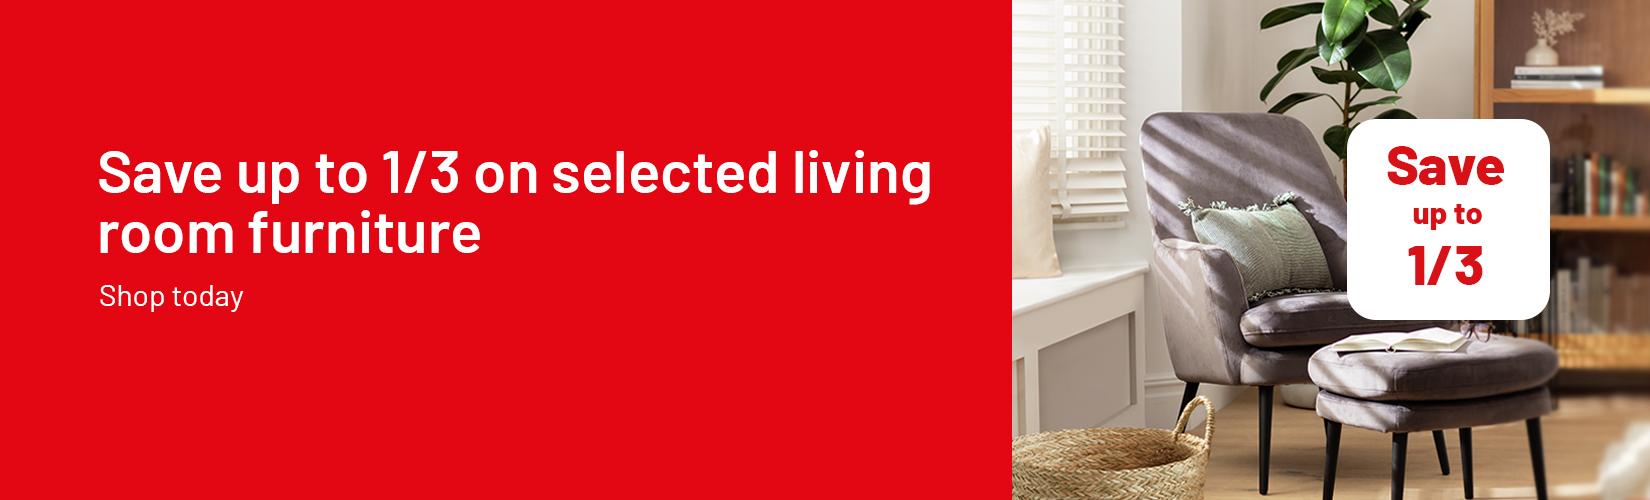 Save up to 1/3 on selected living room furniture.